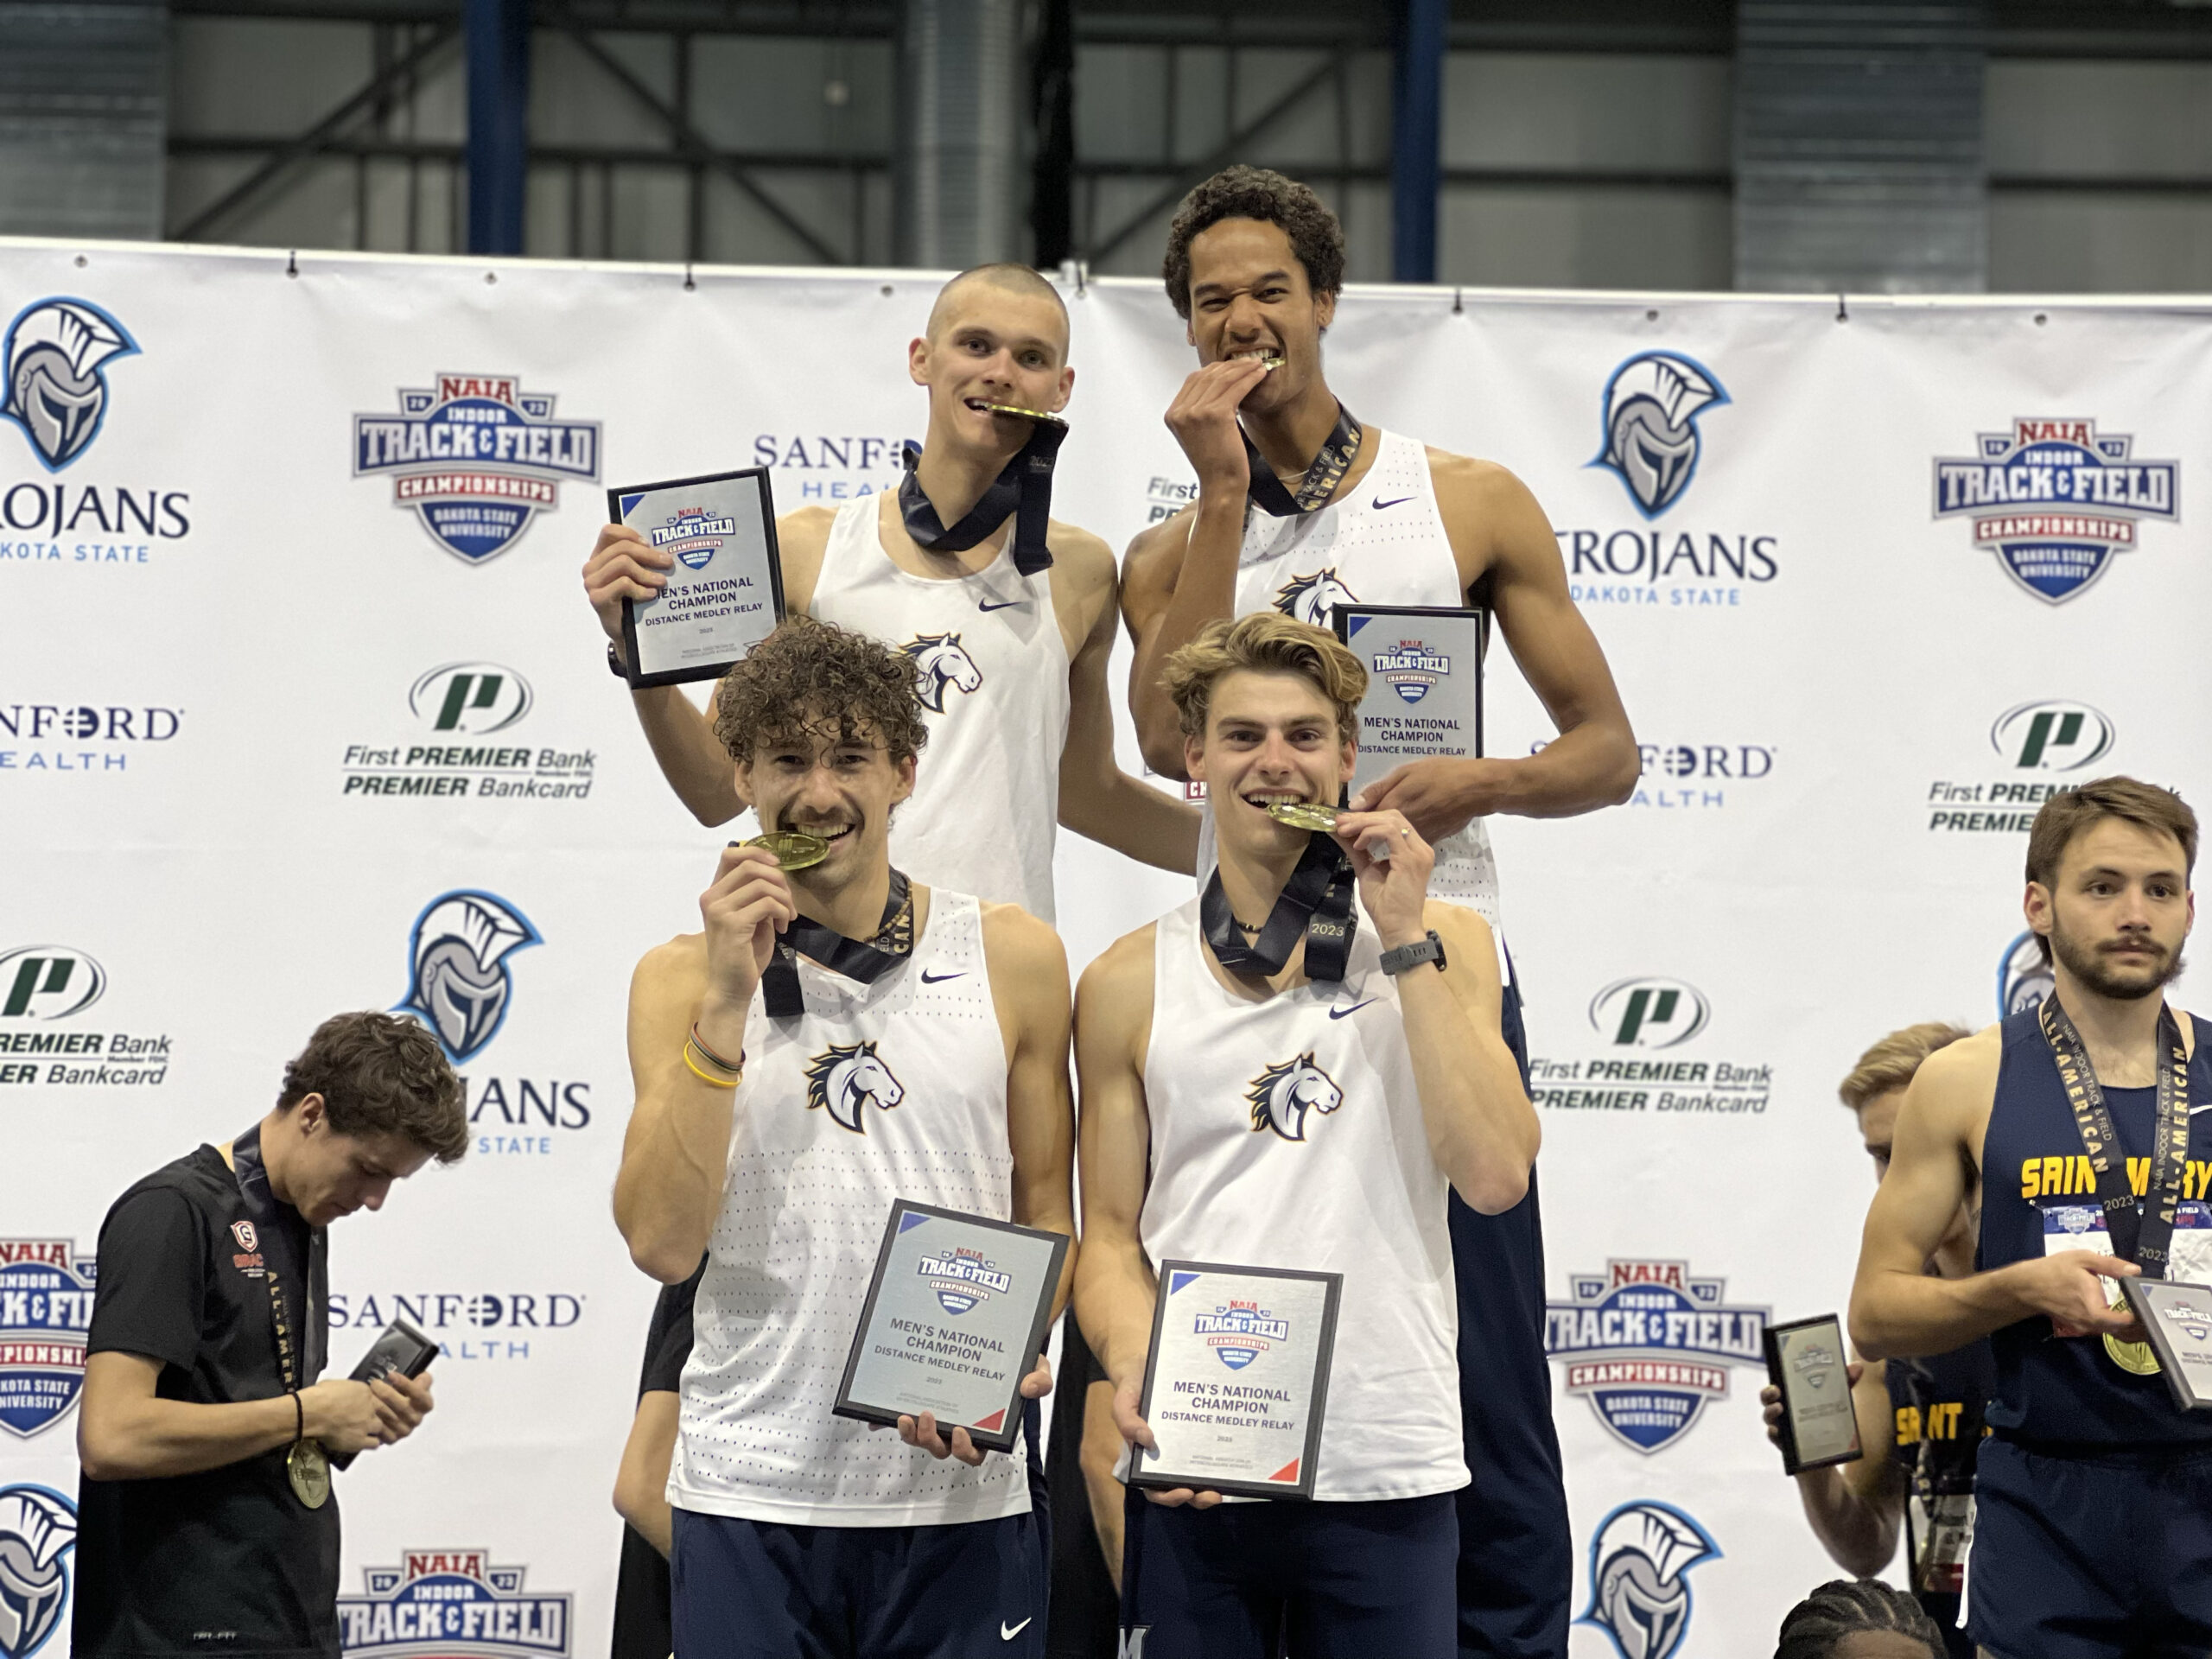 Indoor Track and Field Athletes Win Two National Titles